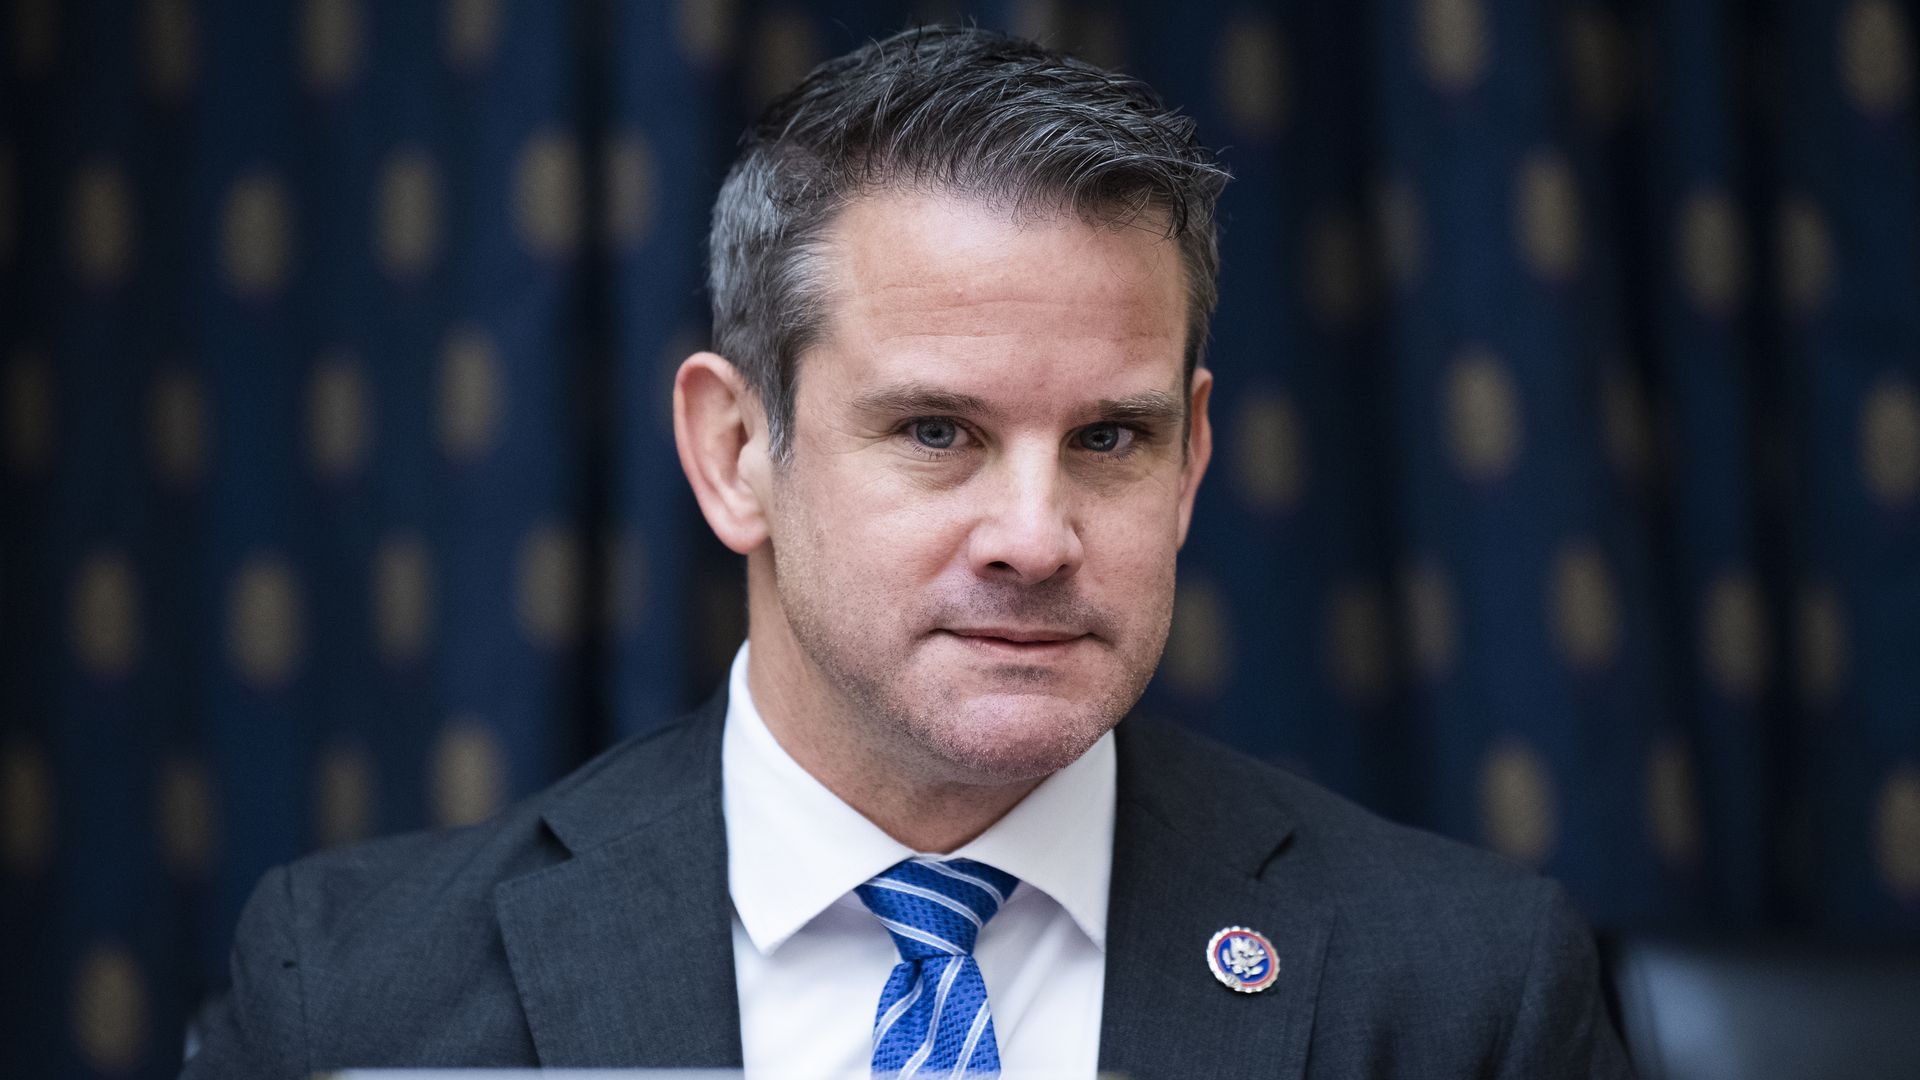 Rep. Adam Kinzinger is seen during a congressional hearing.